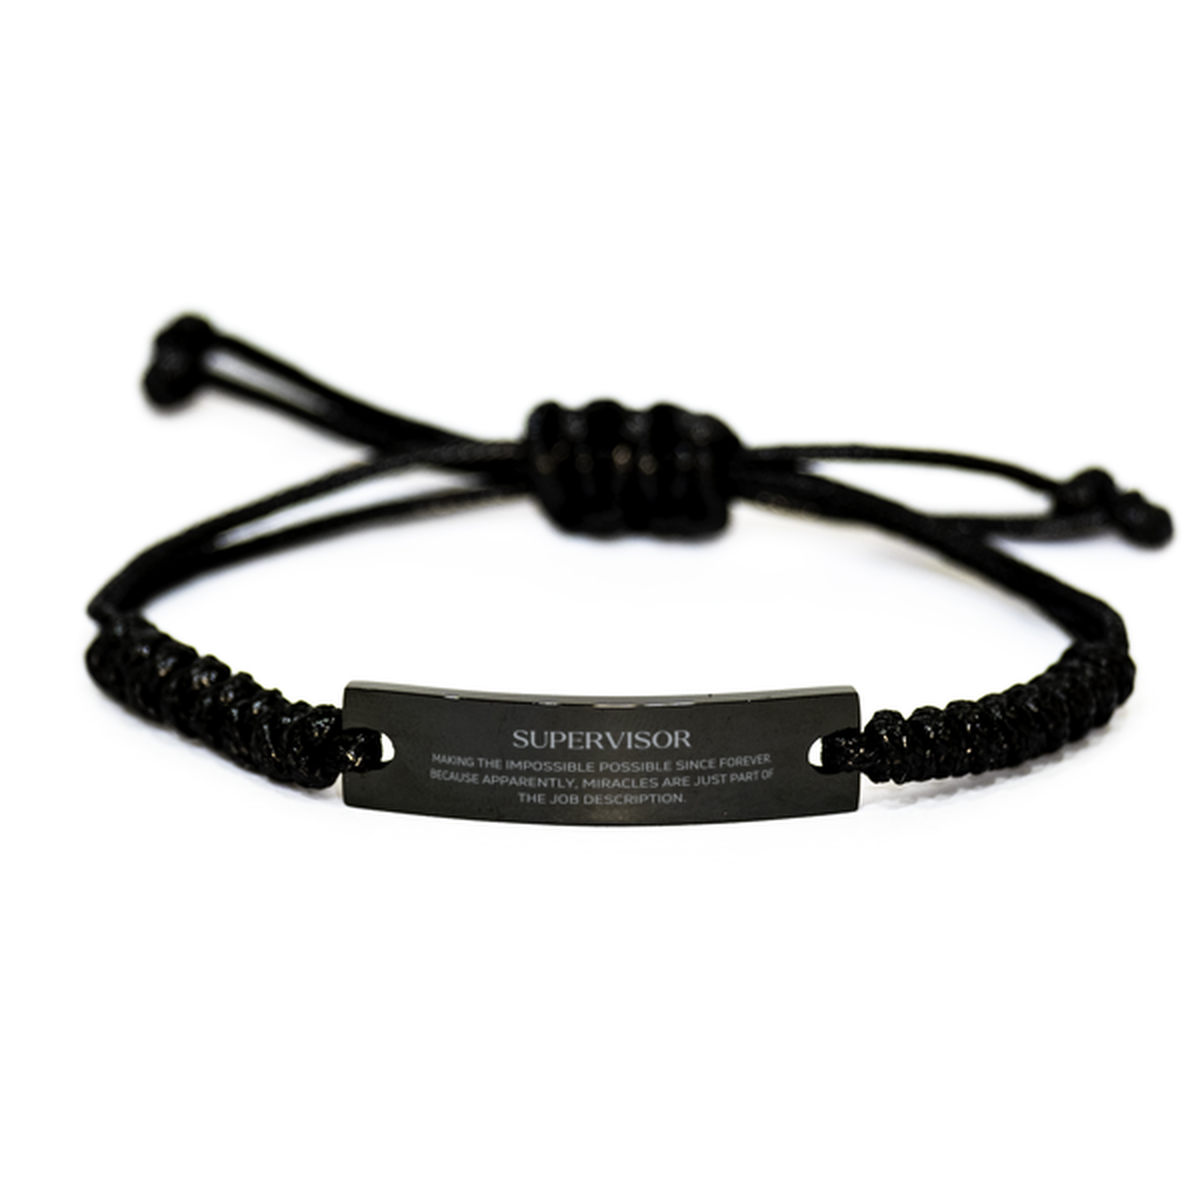 Funny Supervisor Gifts, Miracles are just part of the job description, Inspirational Birthday Black Rope Bracelet For Supervisor, Men, Women, Coworkers, Friends, Boss